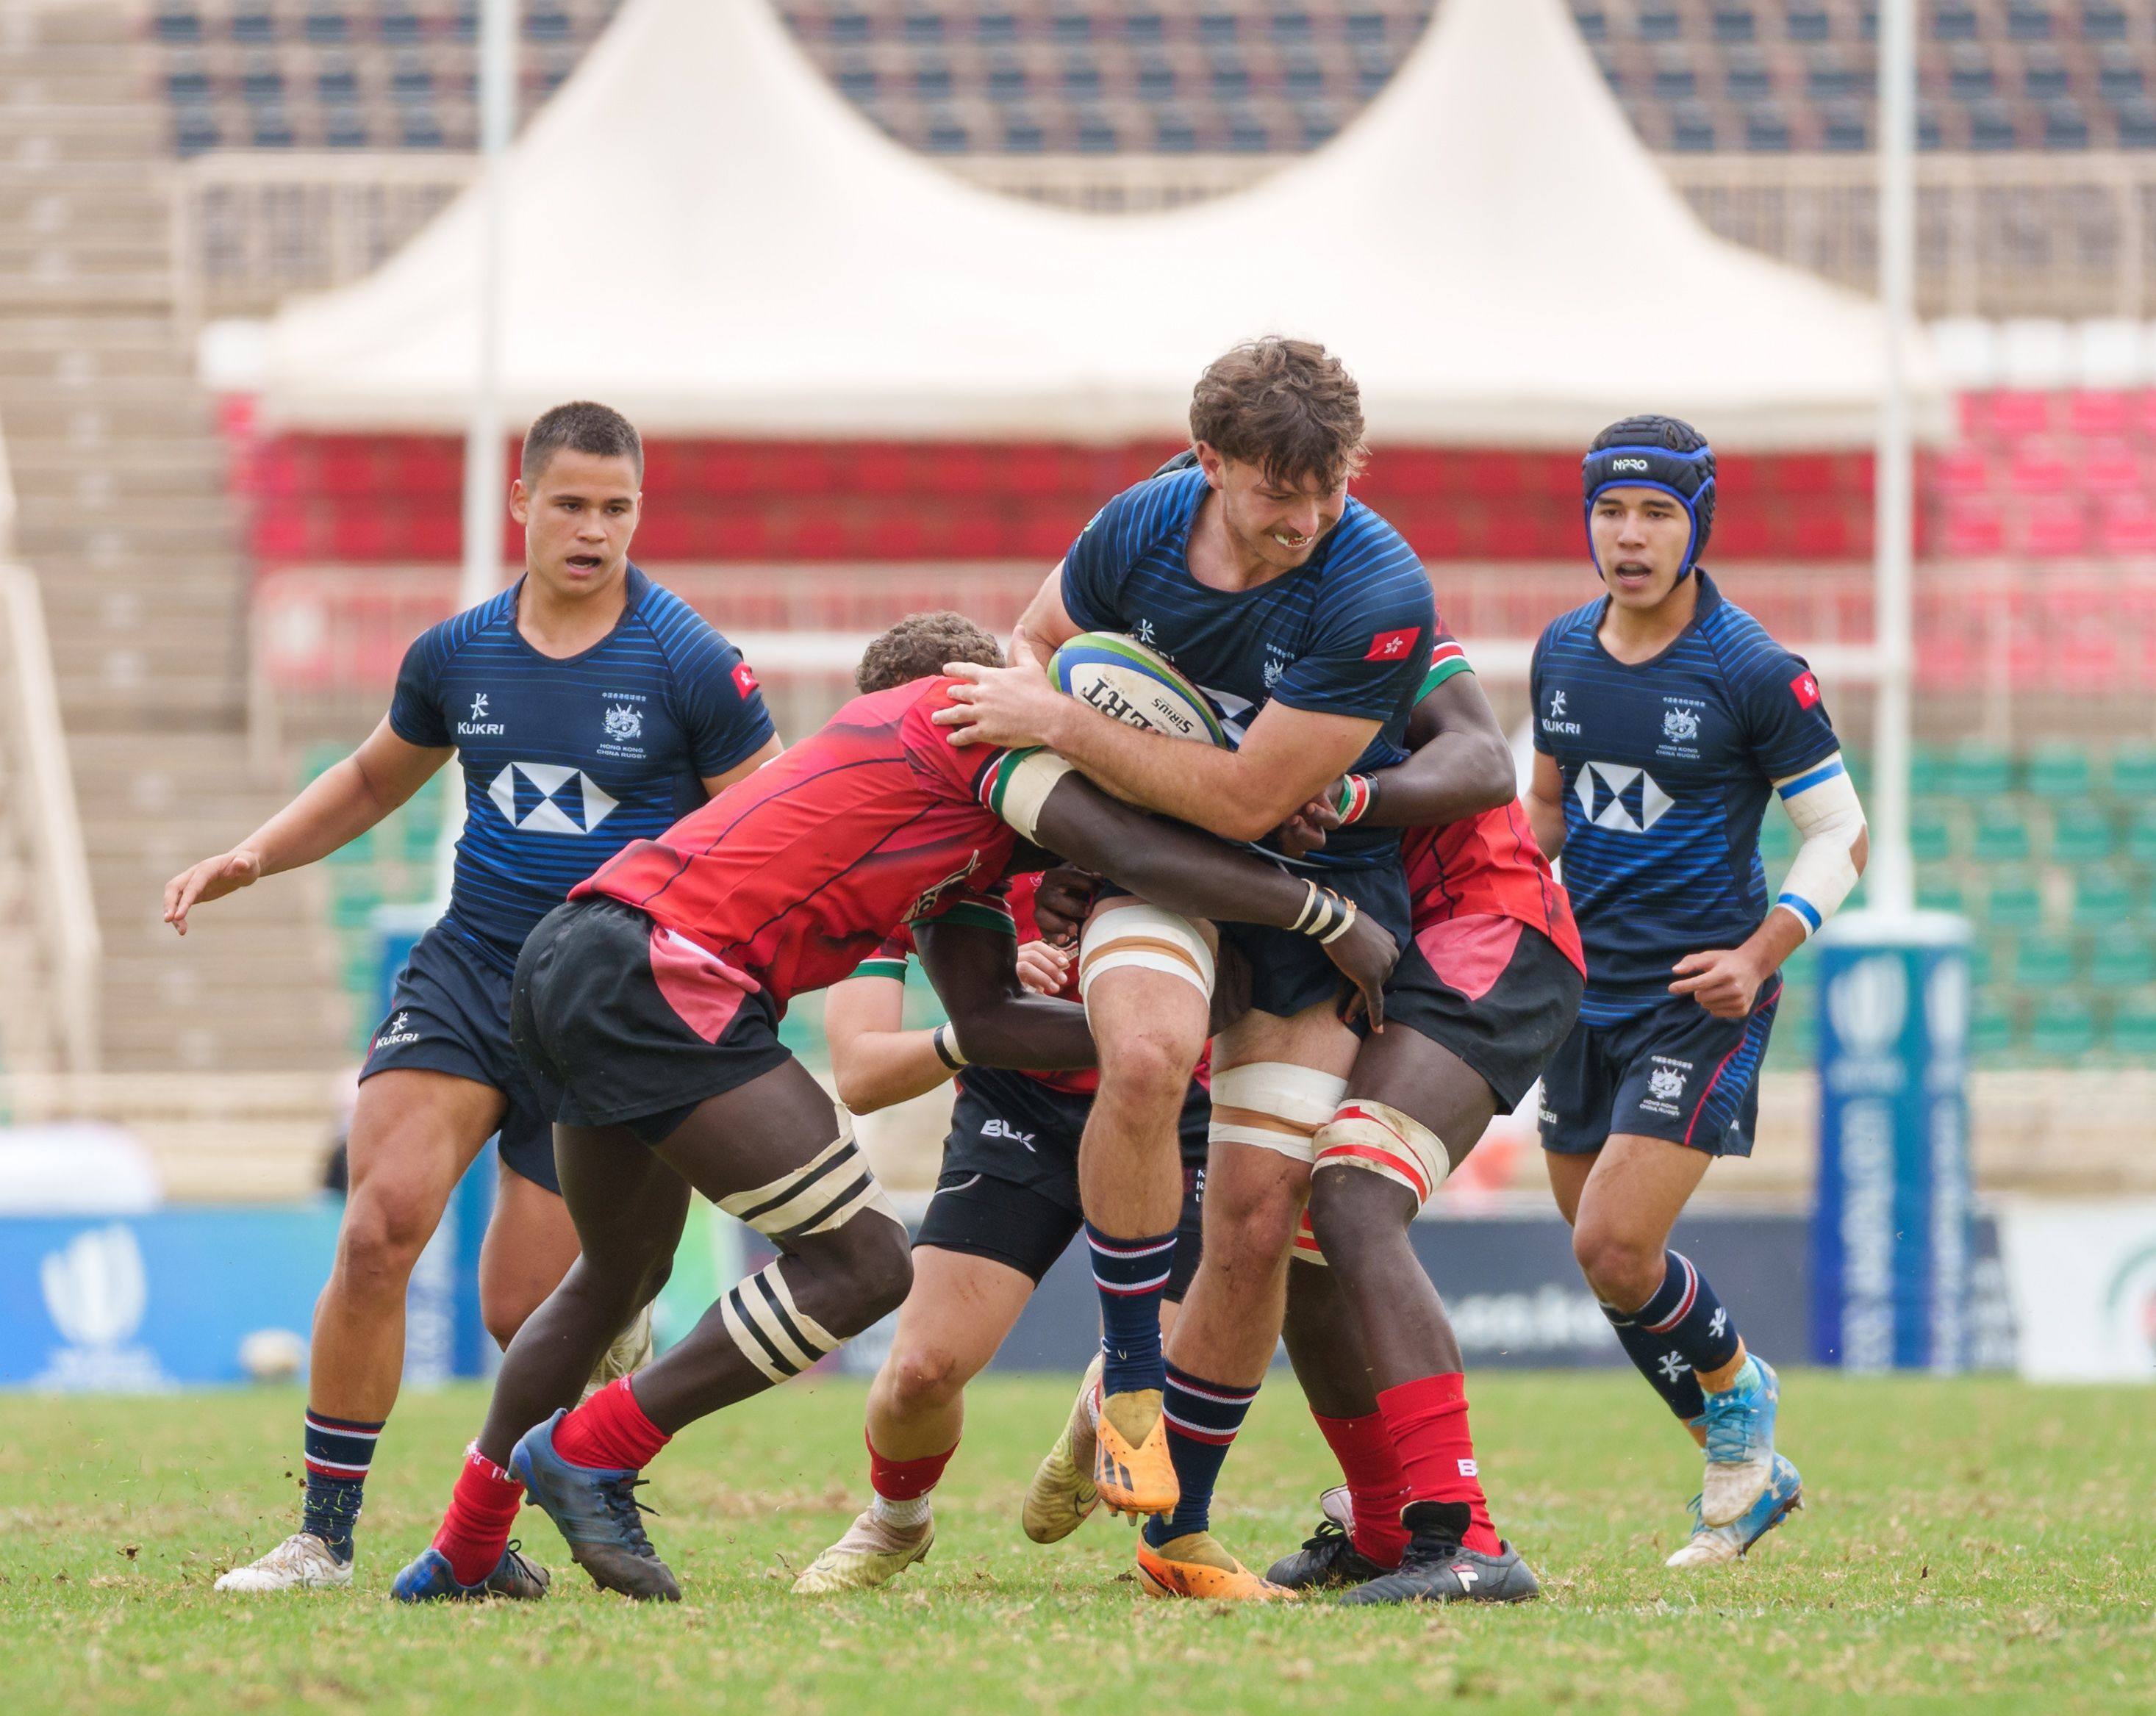 Hong Kong U20 skipper Tyler McNutt is confident the city has the potential to shake up rugby’s established order. Photo: World Rugby